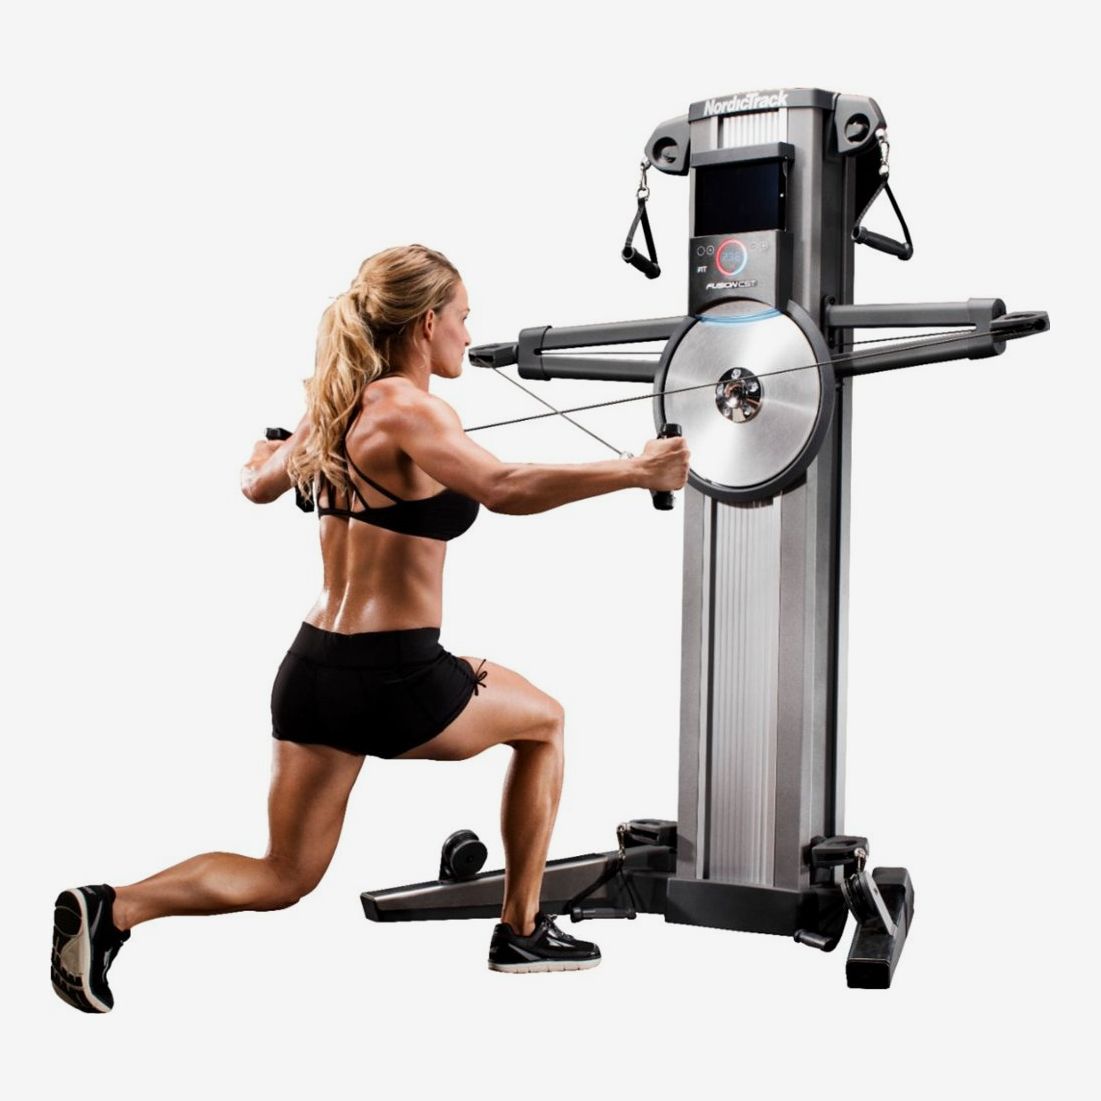 gym workout equipment for sale